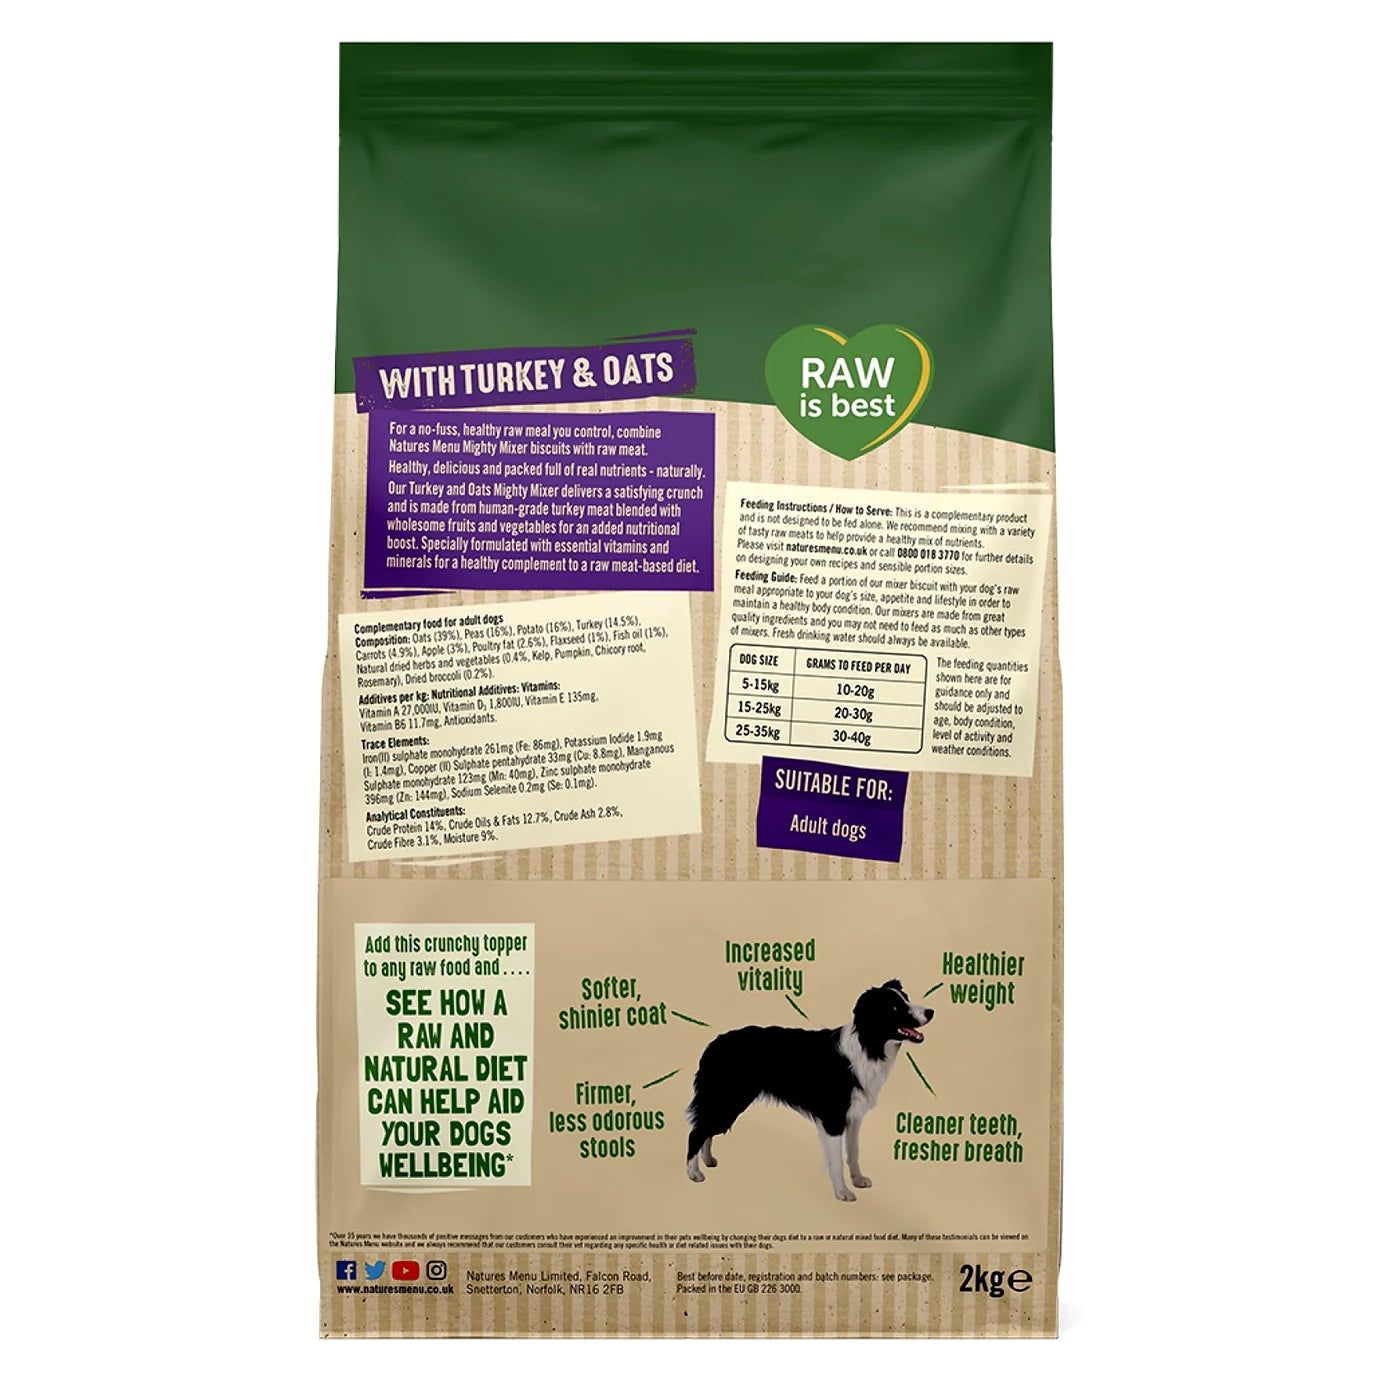 Natures Menu - Mighty Mixer with Turkey and Oats - 2kg